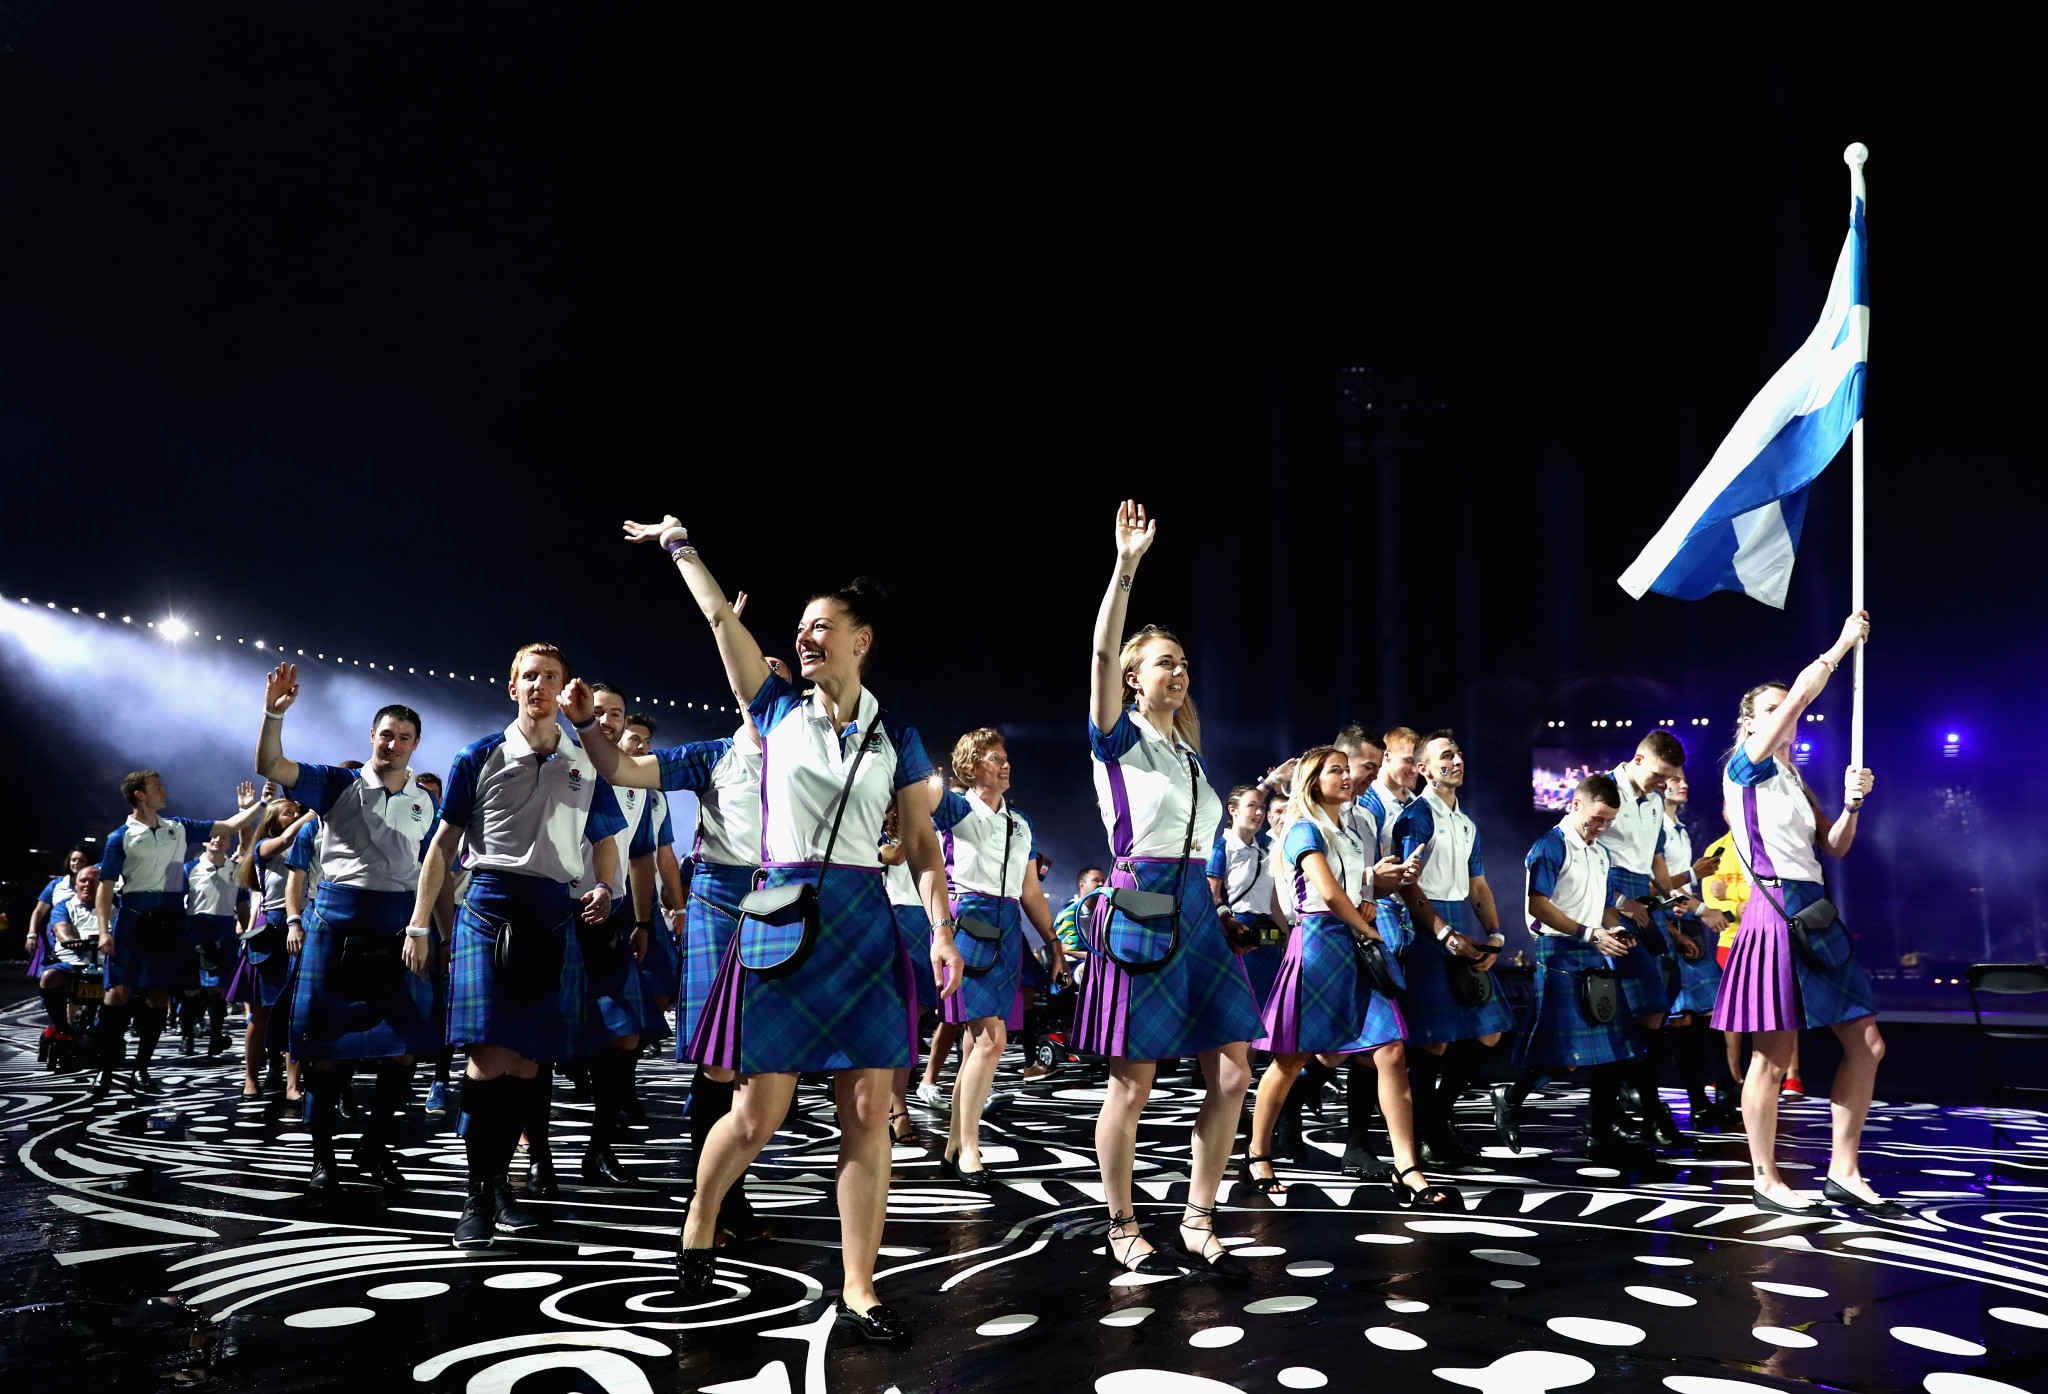 Commonwealth Games Scotland is inviting clothing manufacturers and design agencies to work with Team Scotland for the Birmingham 2022 Commonwealth Games ©Getty Images